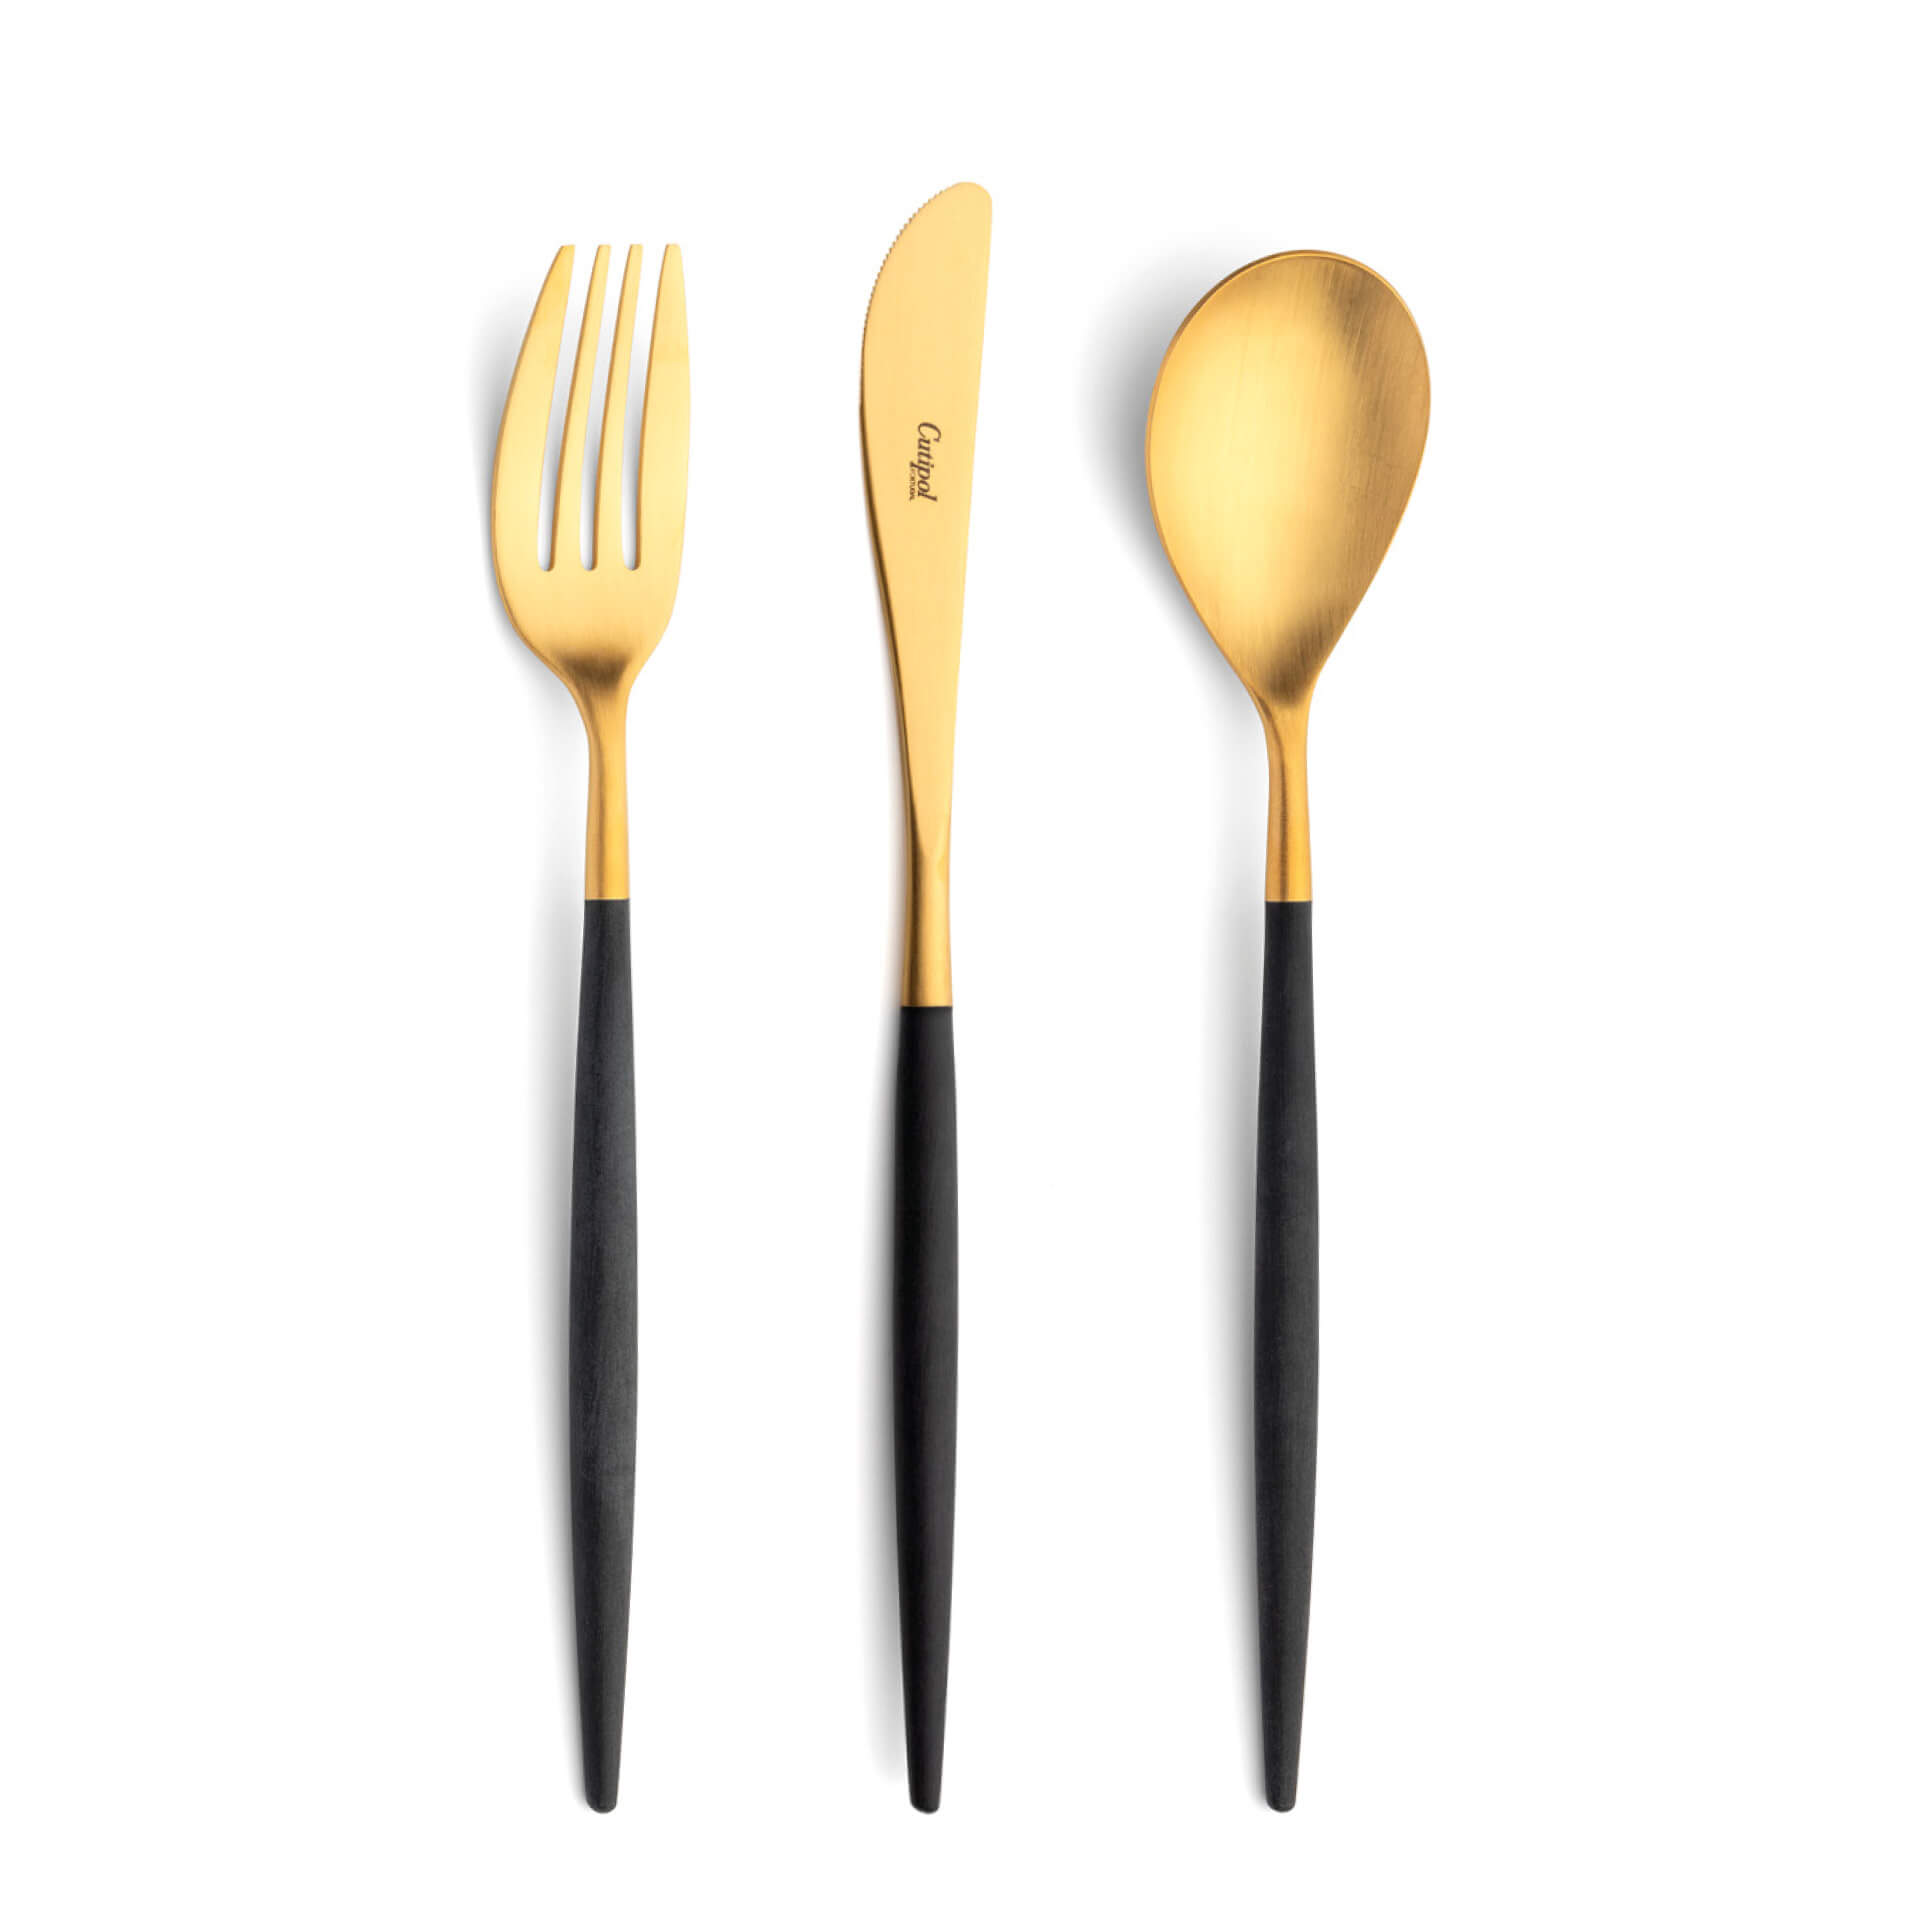 Cutipol Cutlery Mio Gold with dinner fork, dinner knife, table spoon